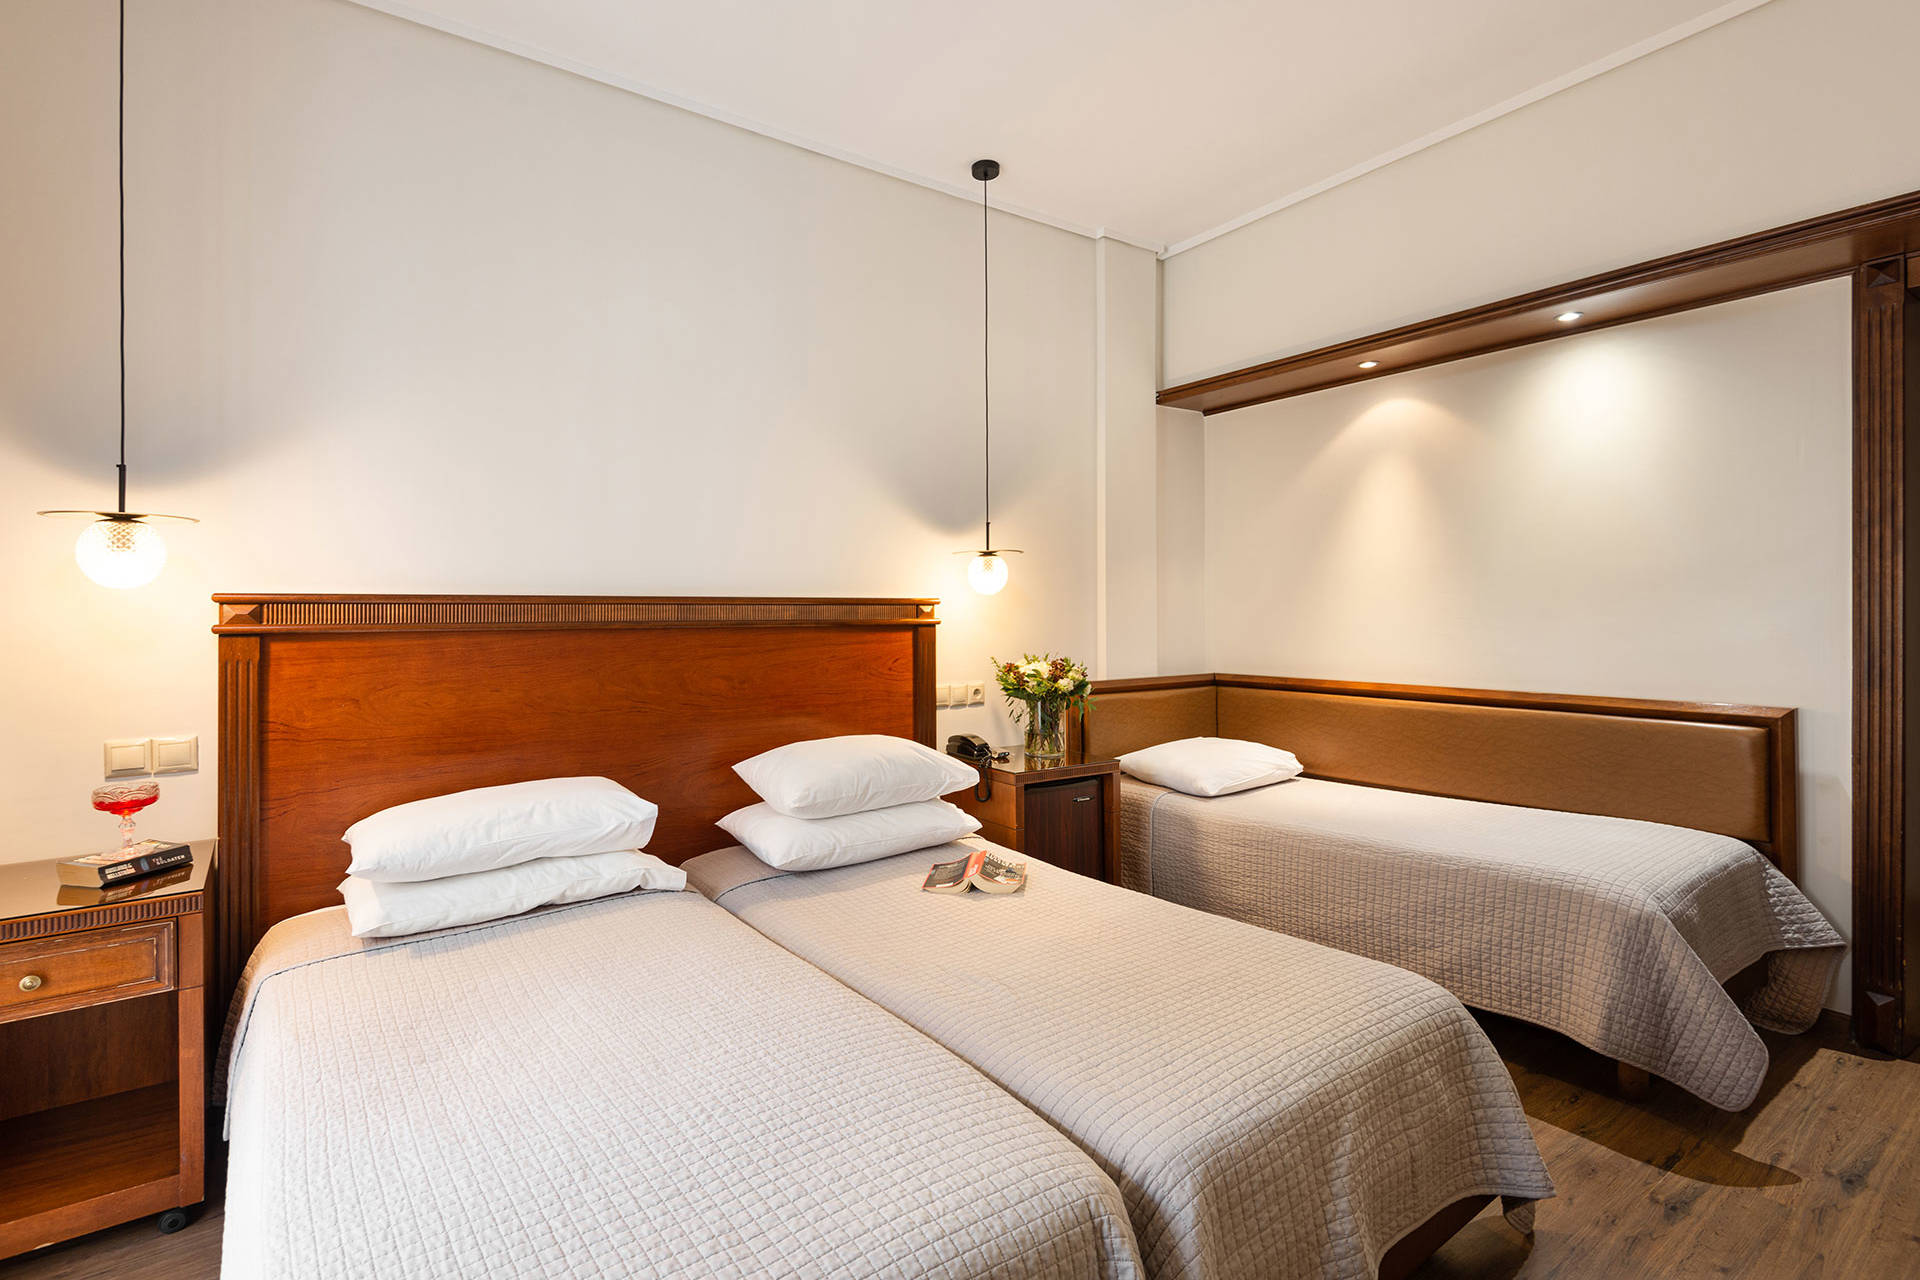 
El Greco Hotel Thessaloniki Triple Room twin bed and single bed